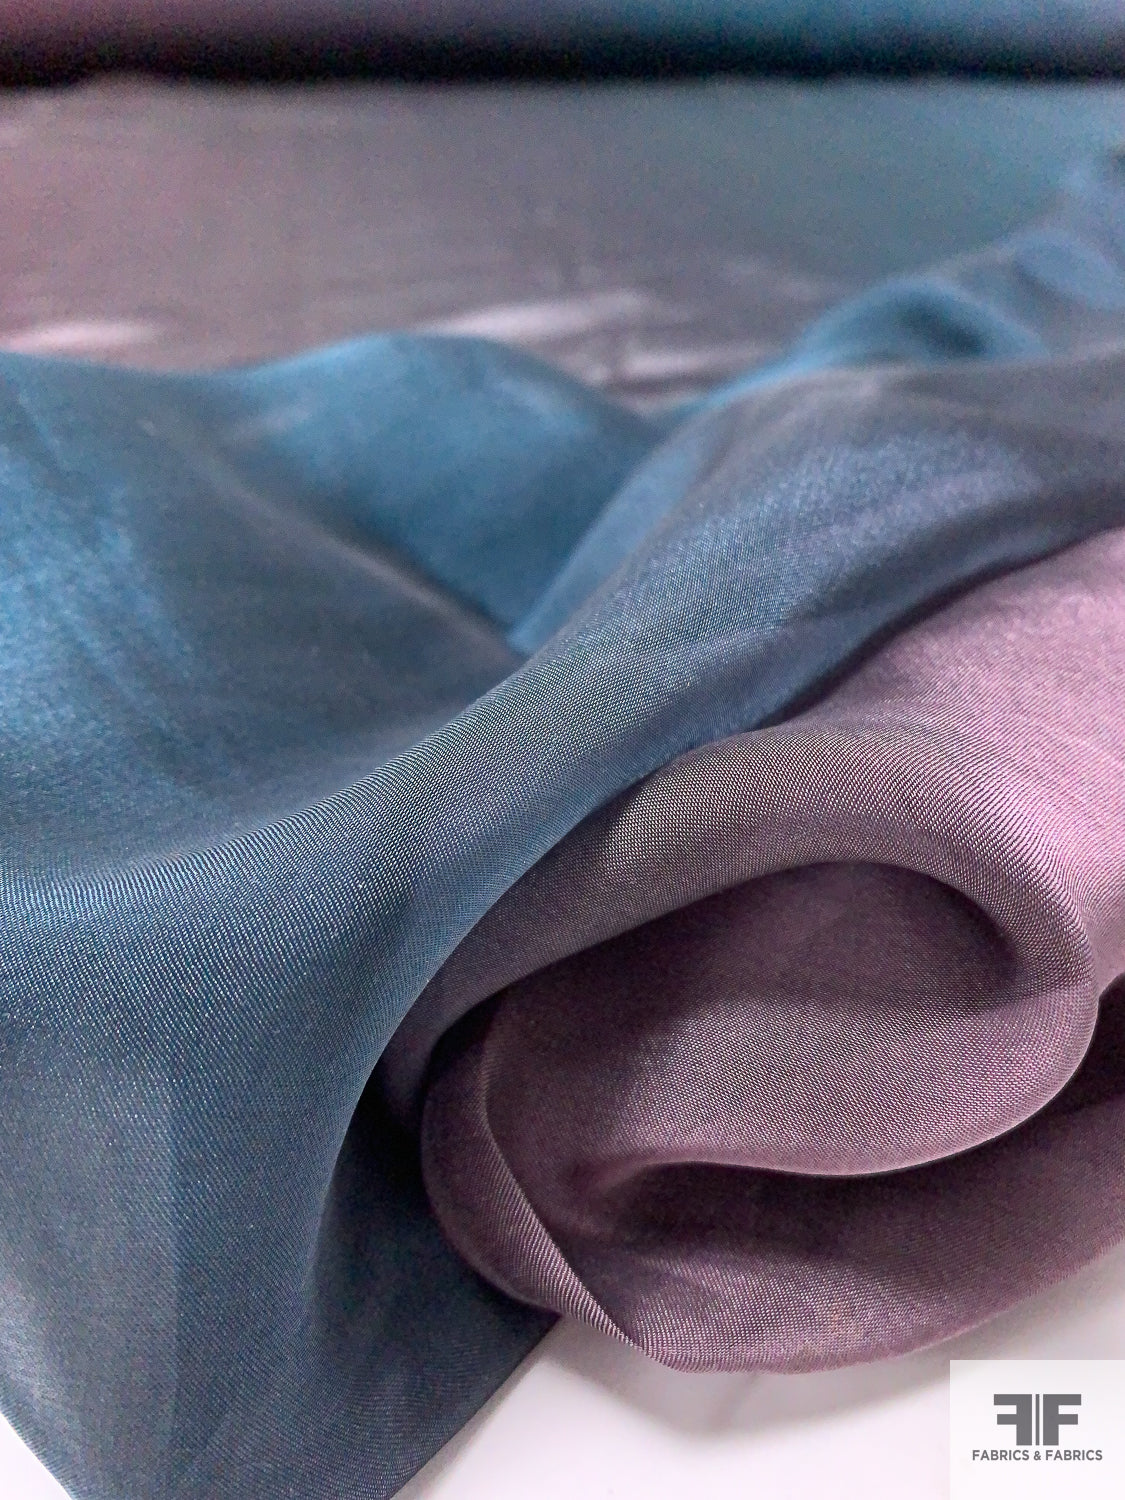 French Ombré Printed Silk Chiffon - Teal / Dusty Rose